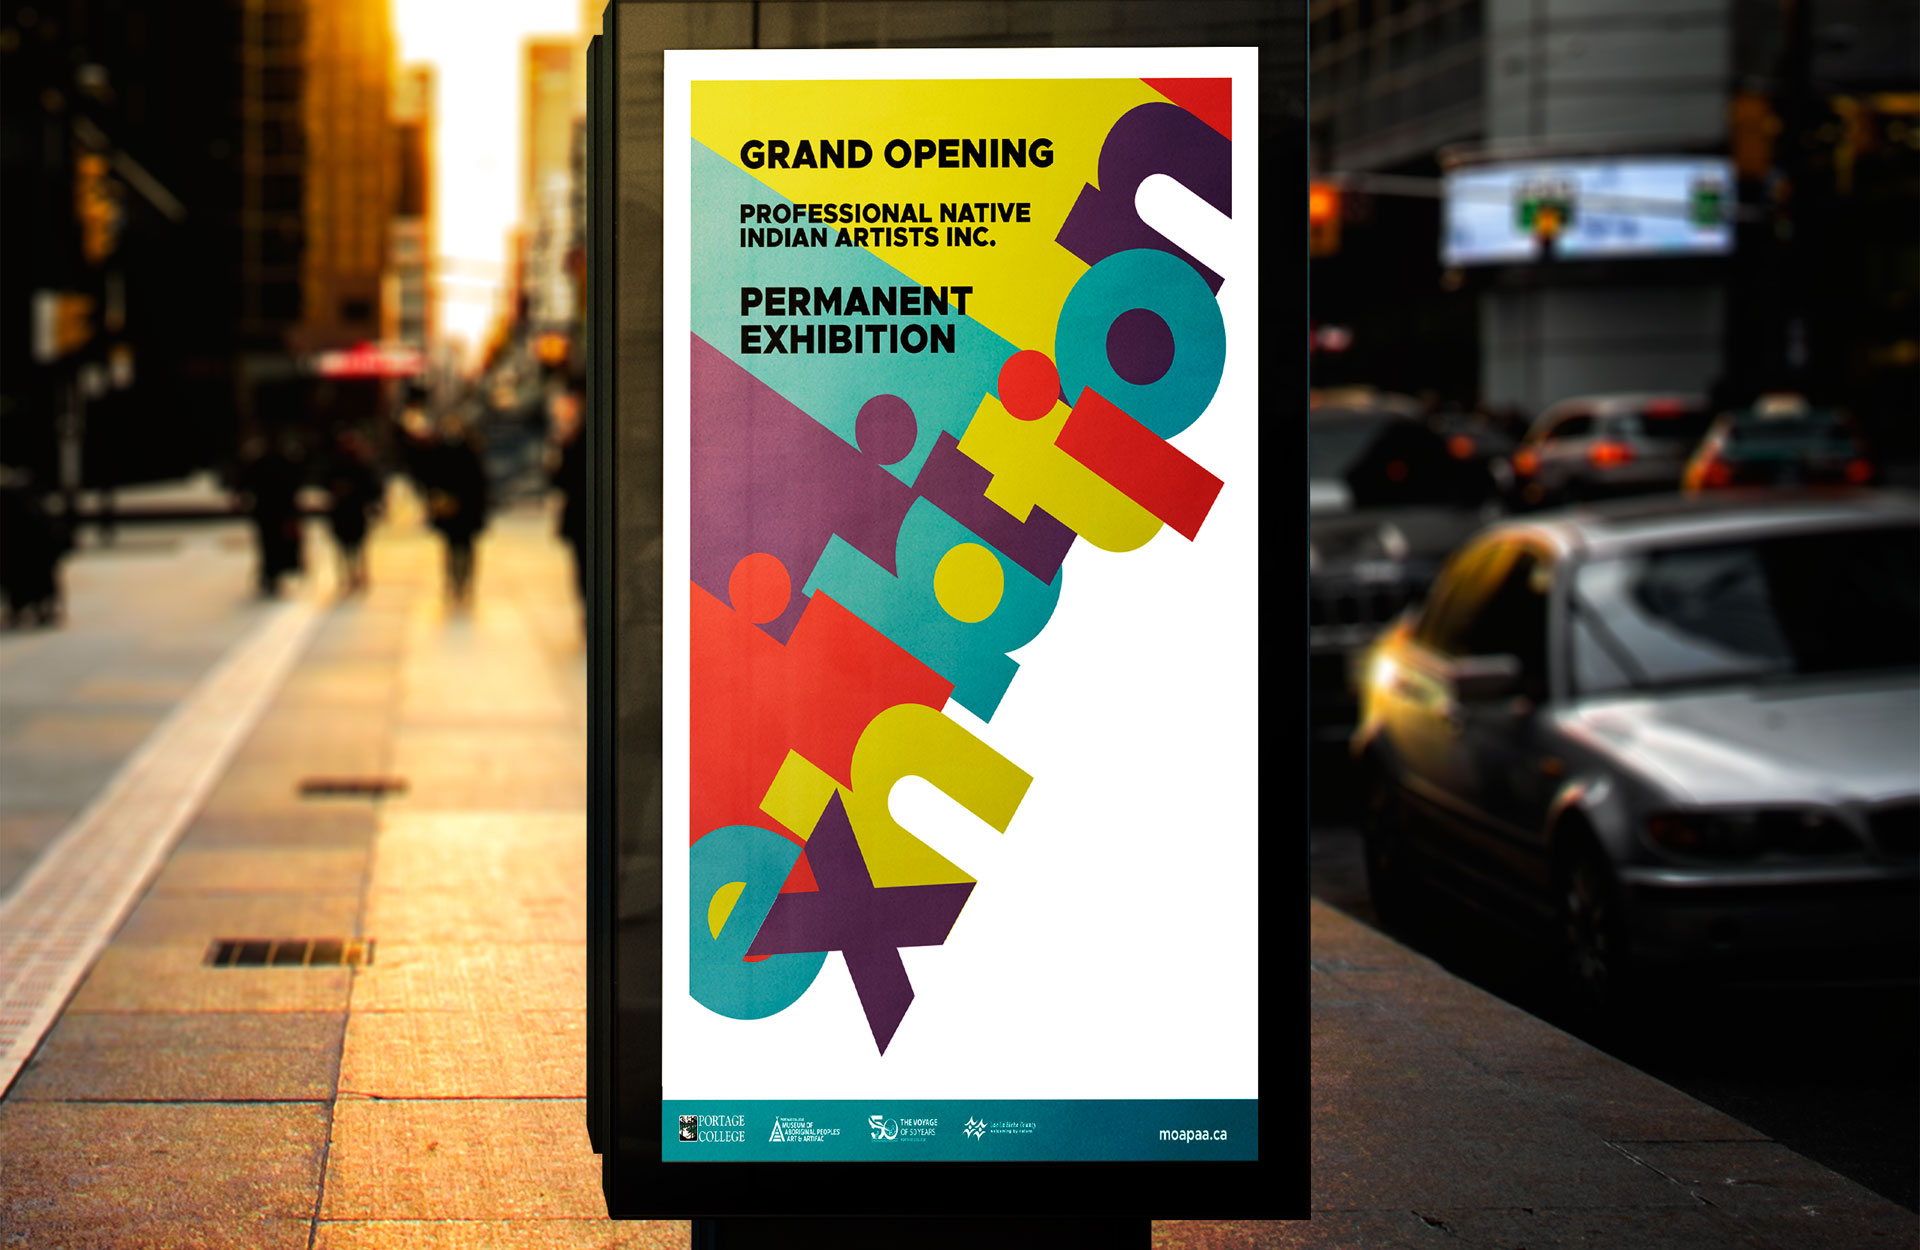 Portage College MOAPAA Grand Opening Poster